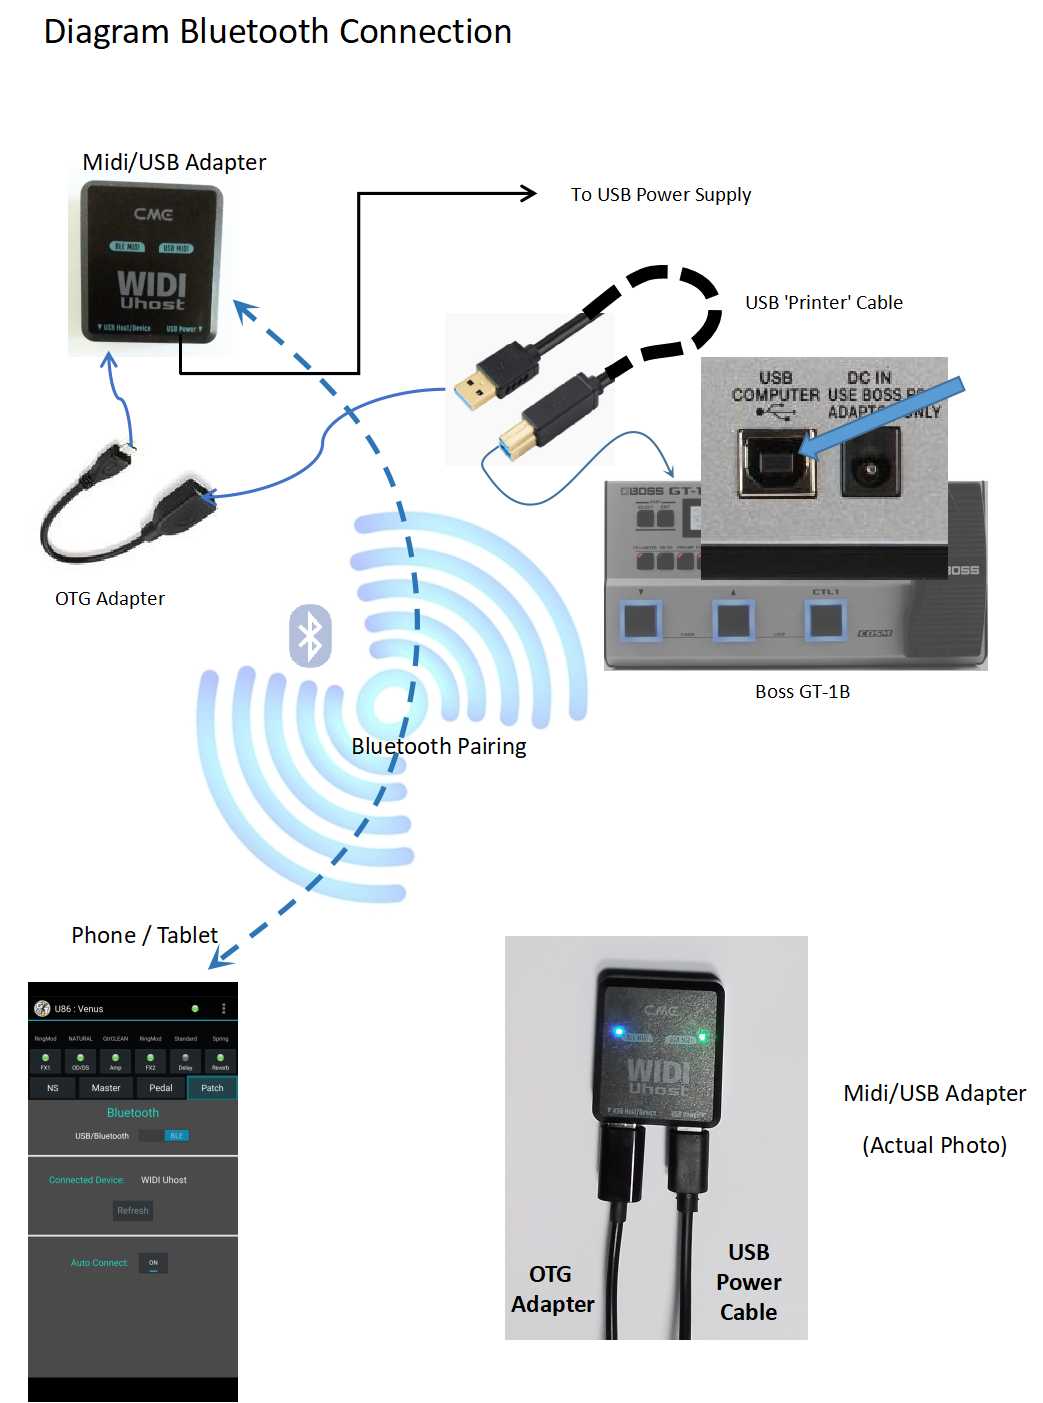 Bluetooth Connection with Midi adapter